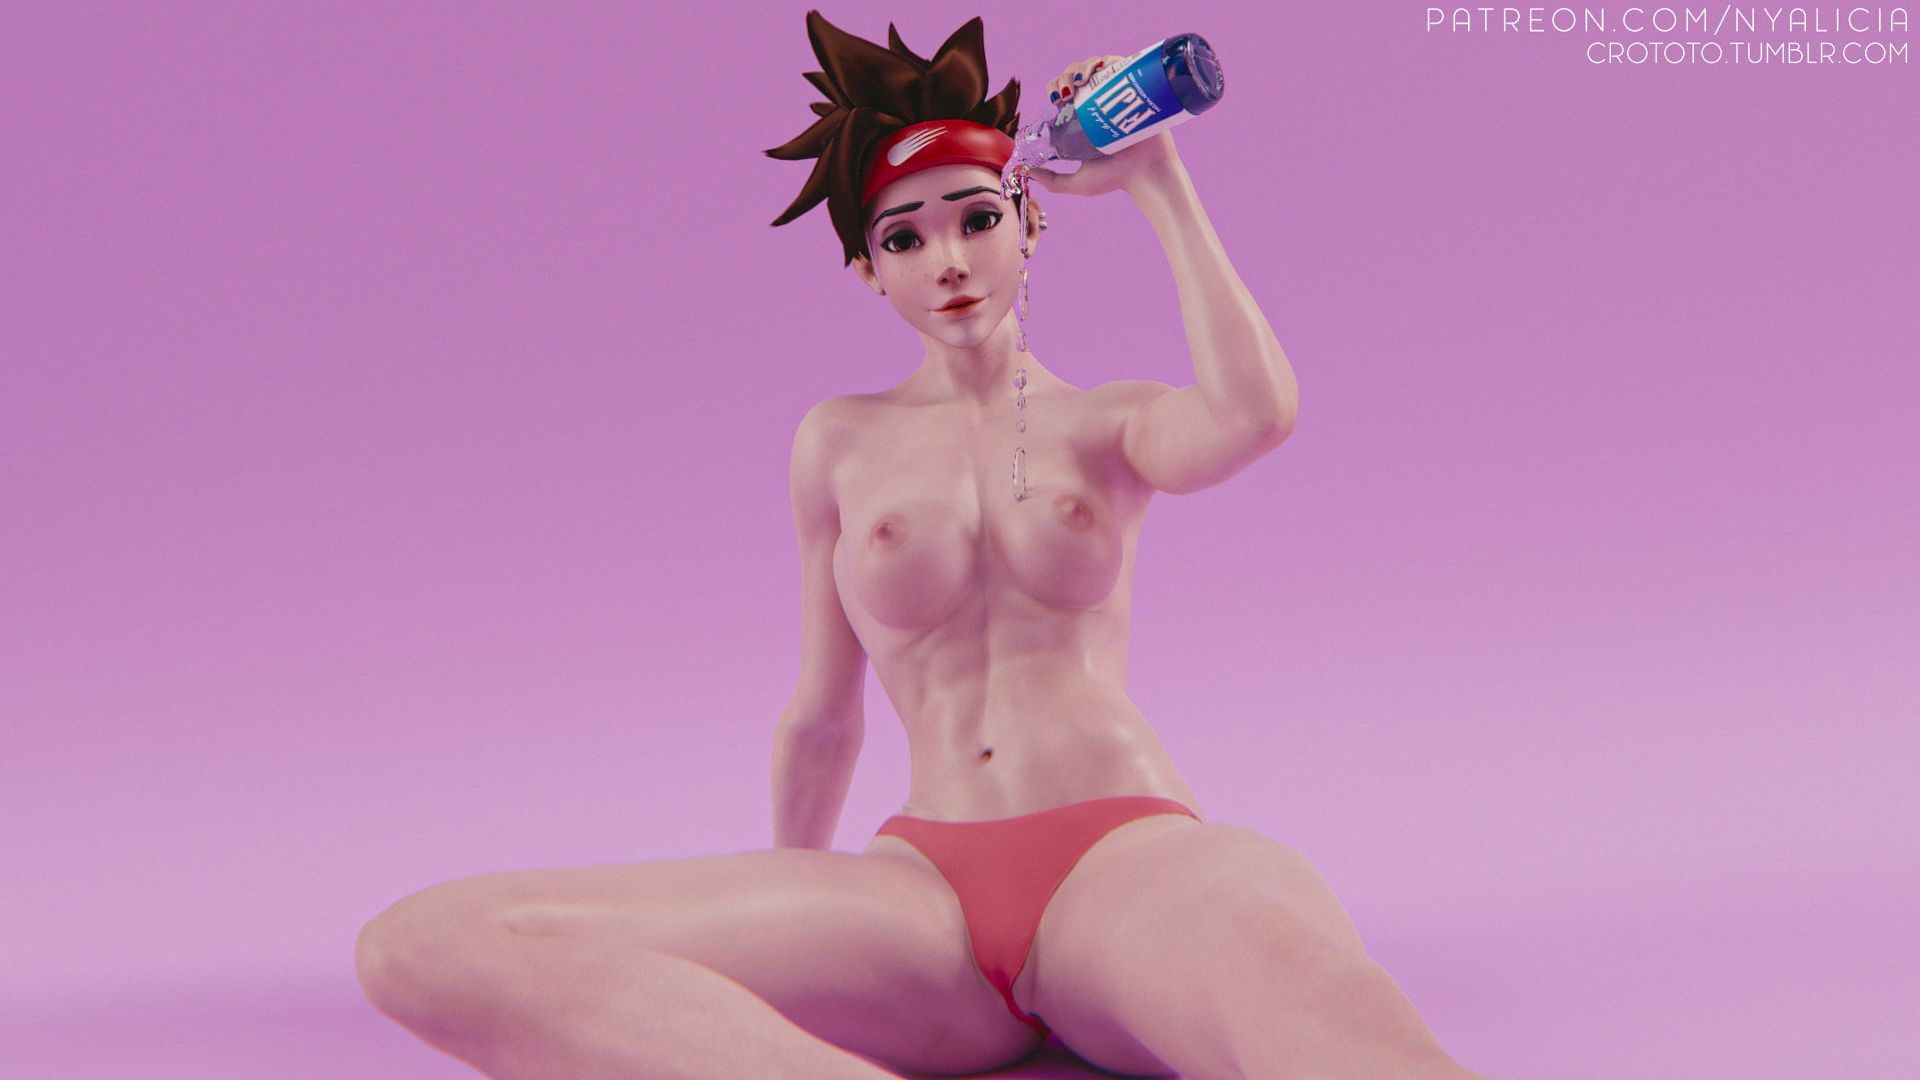 335366%20-%203D%20Blender%20Overwatch%20Tracer%20crototo